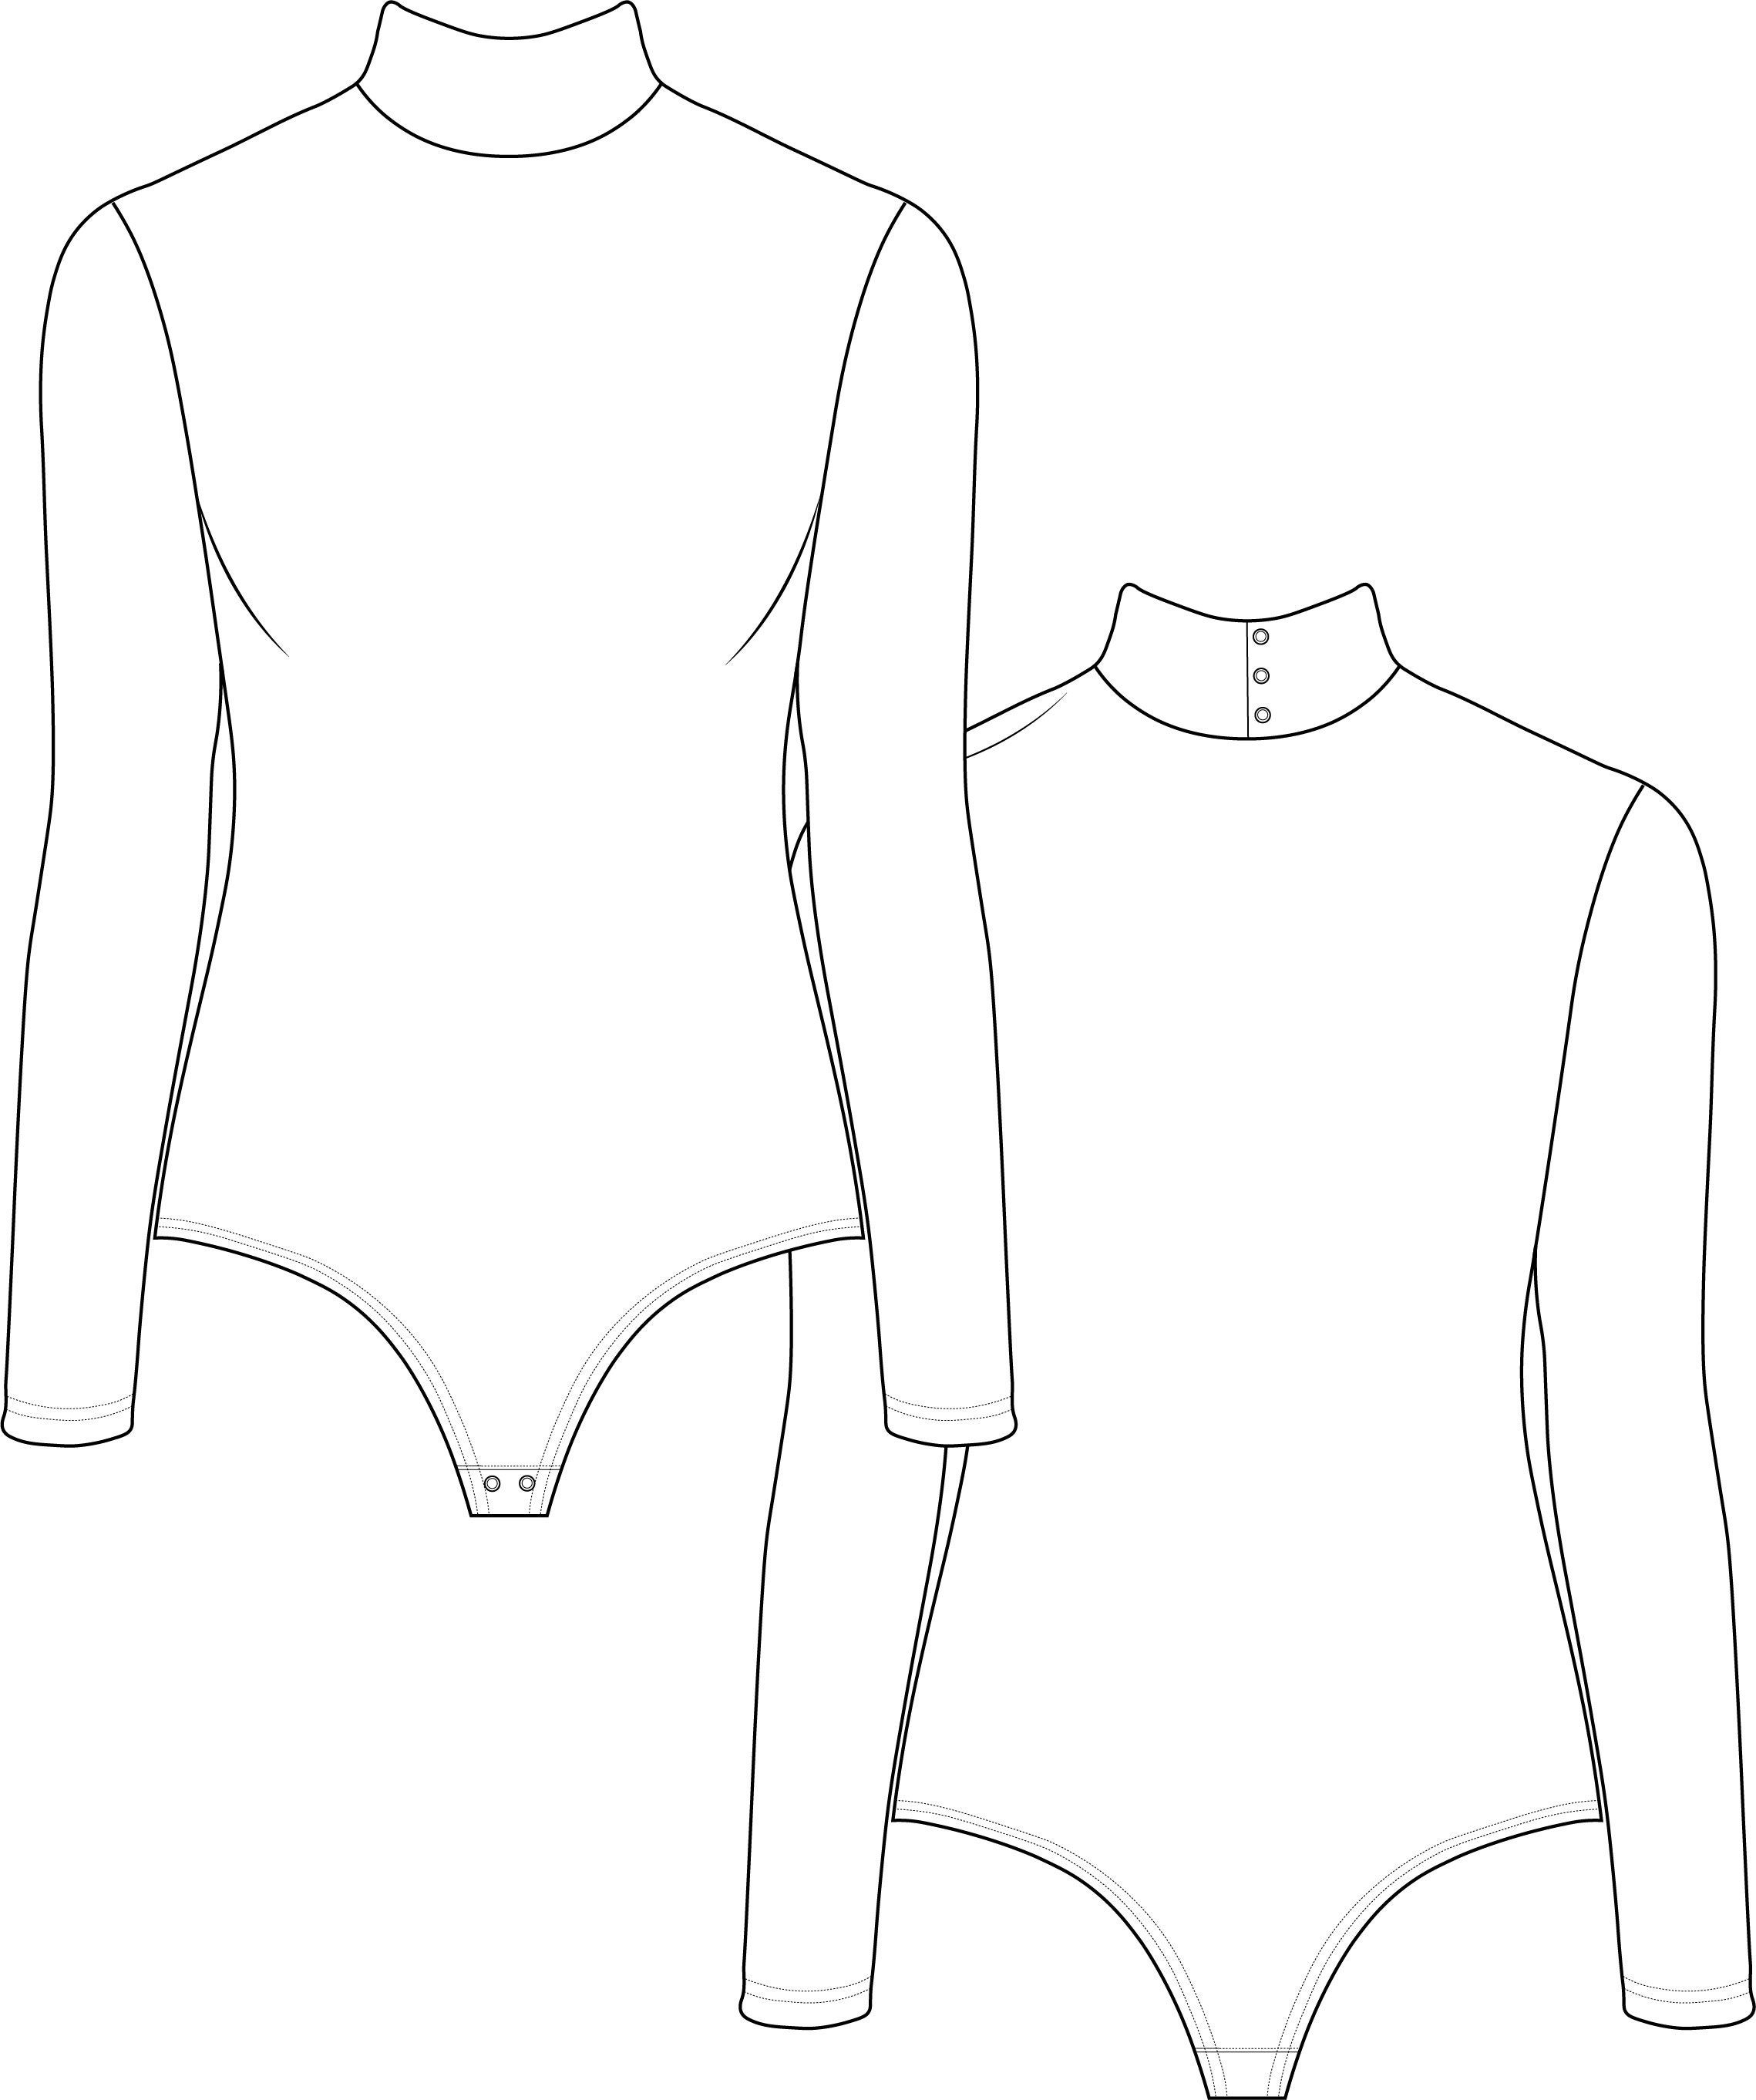 Technical Jersey Cut-Out Body - Ready-to-Wear